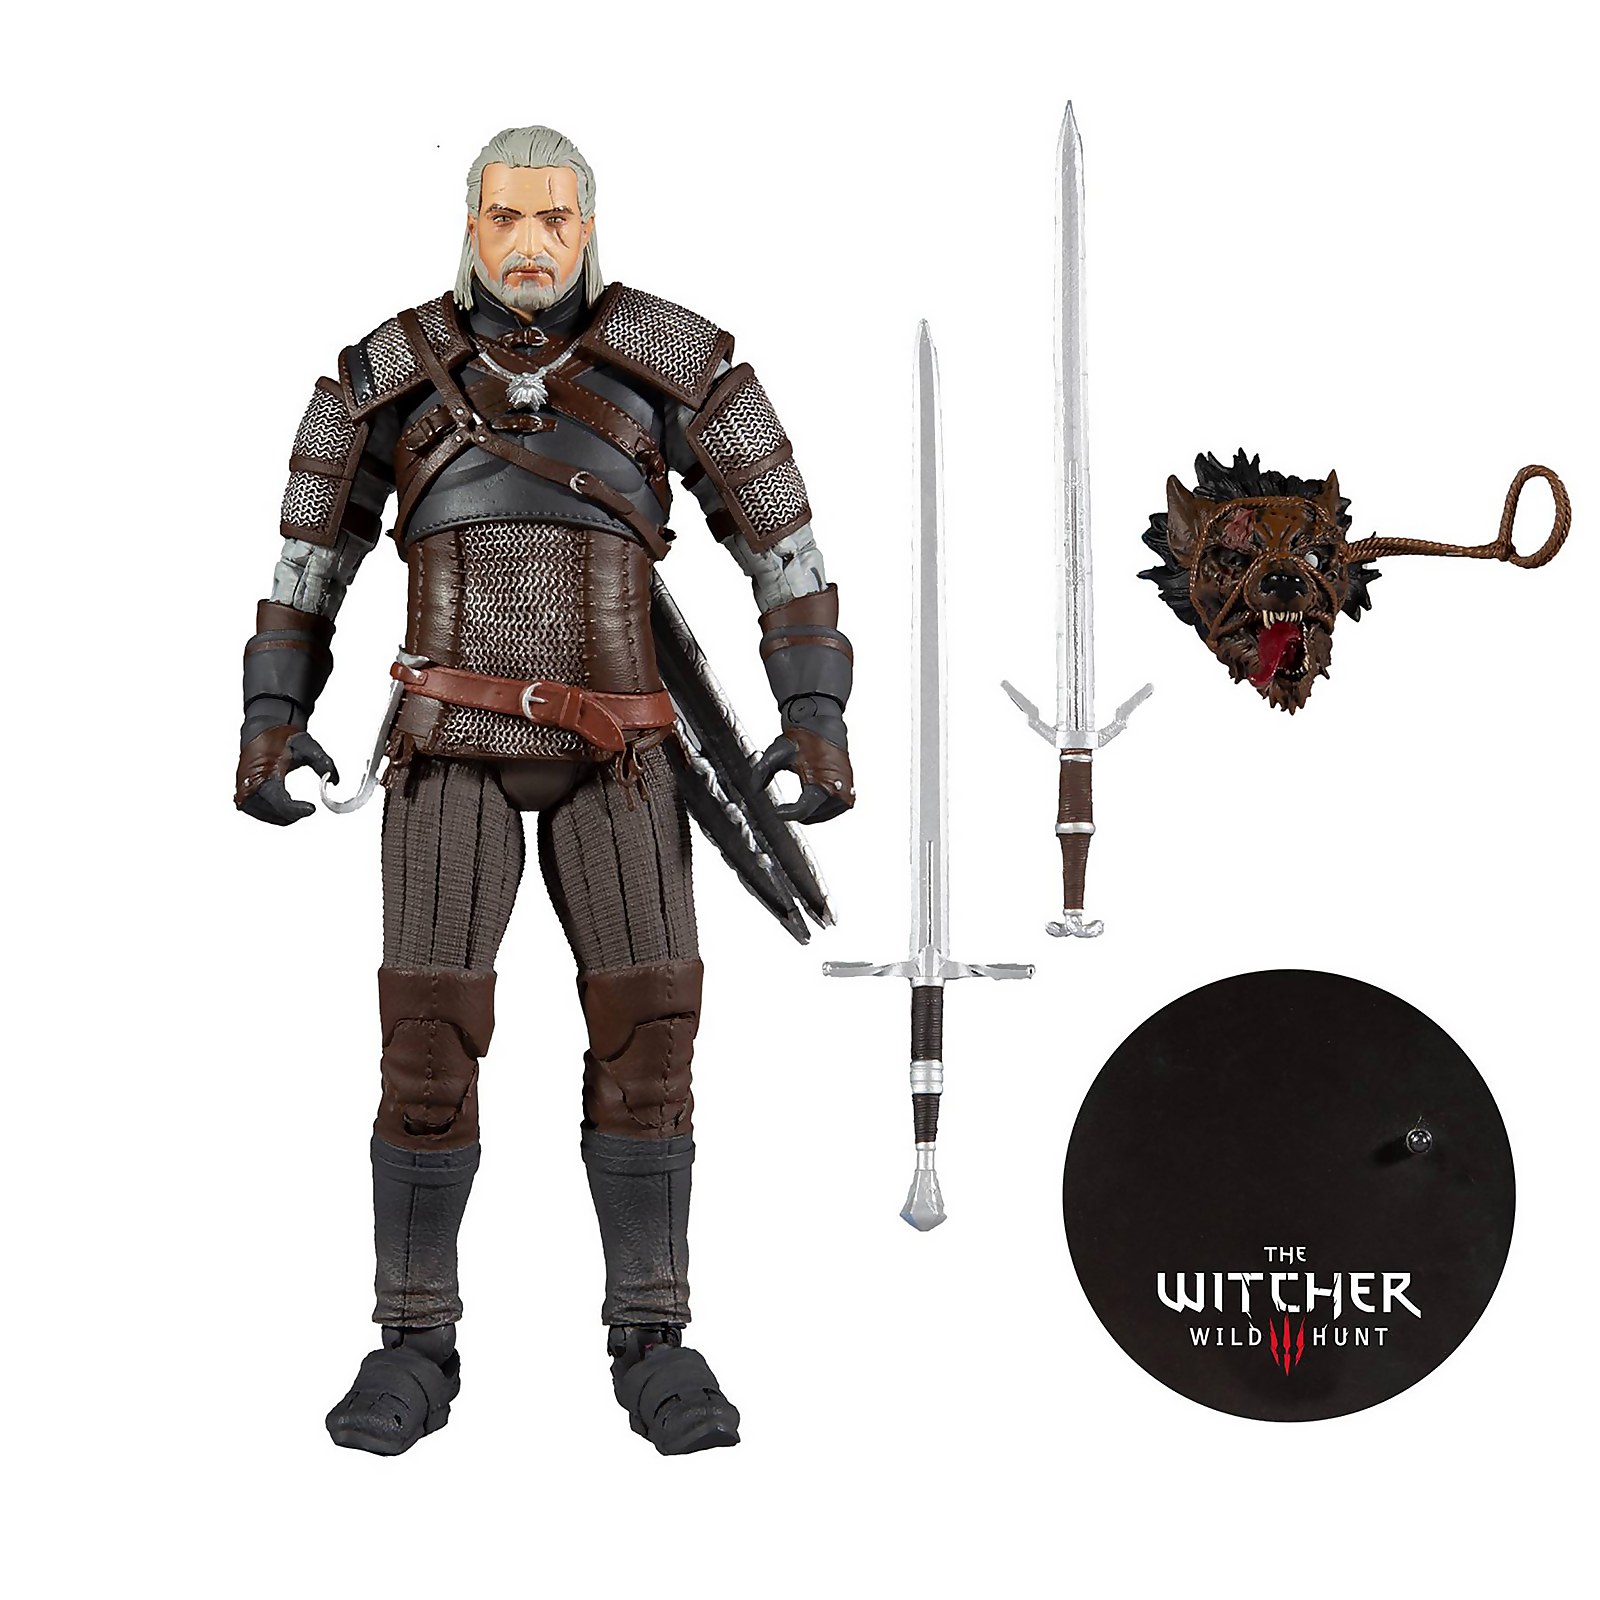 McFarlane Toys Witcher Gaming 7  Figures 1 - Geralt of Rivia Action Figure